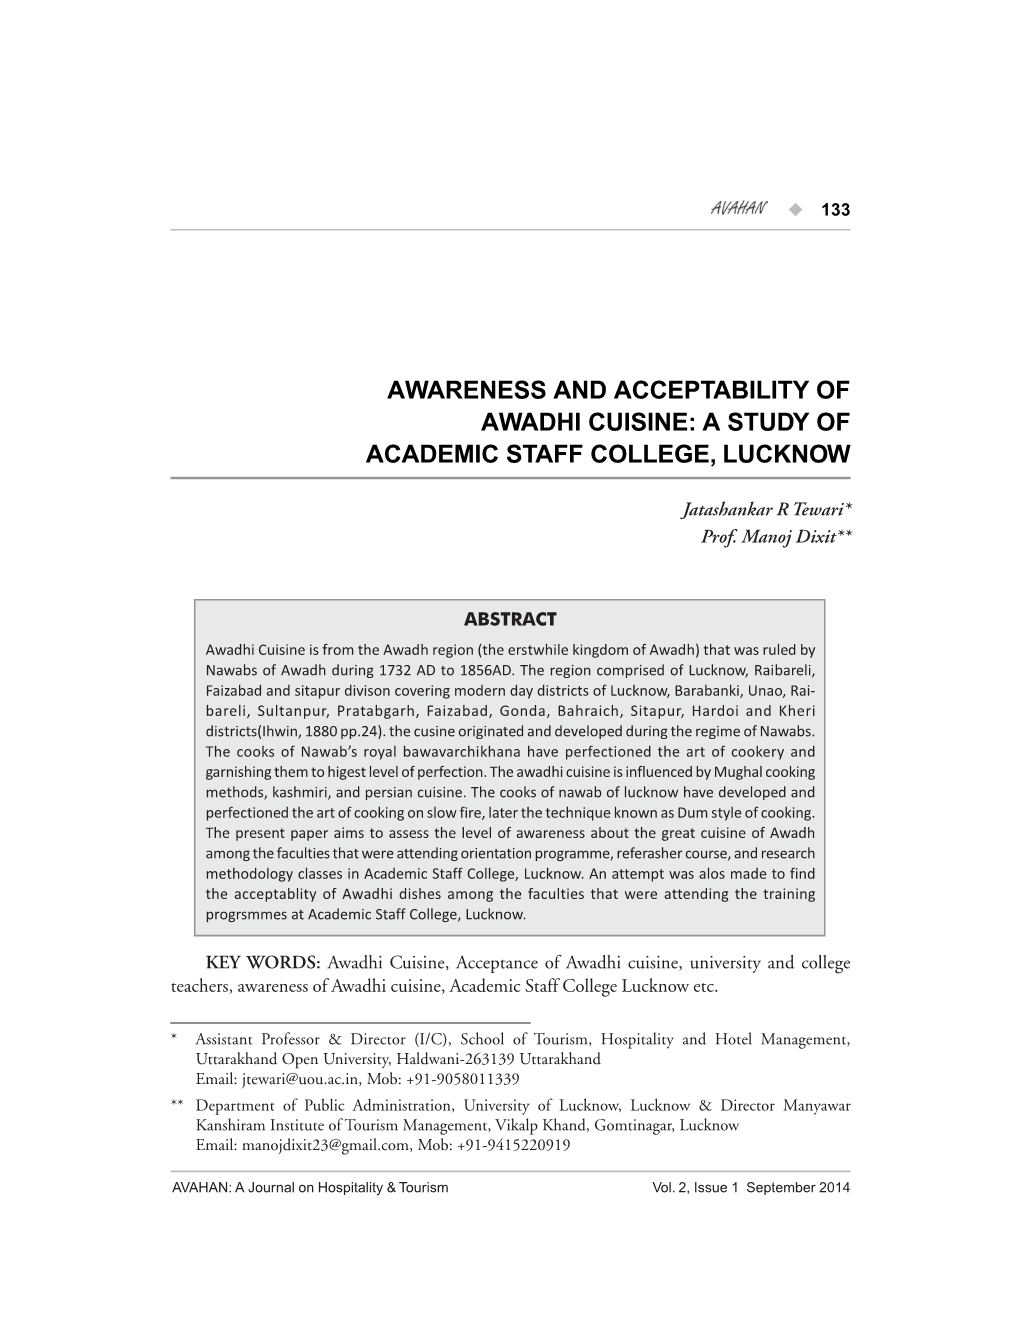 Awareness and Acceptability of Awadhi Cuisine: a Study of Academic Staff College, Lucknow